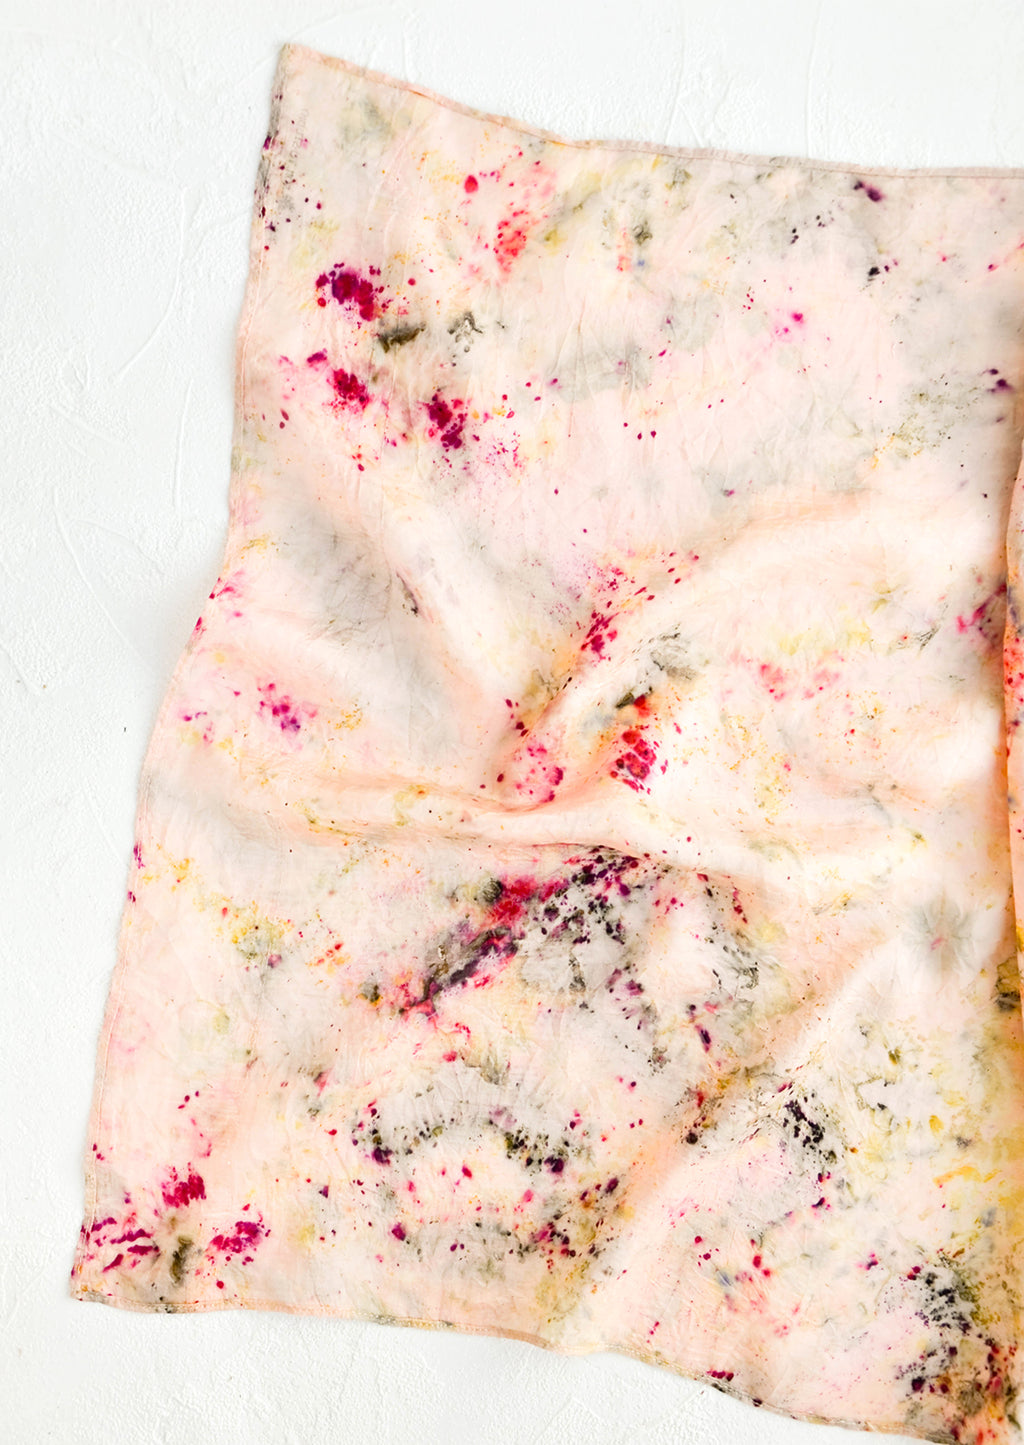 #01: Botanically dyed, one of a kind silk scarf with randomized splatters of color. Soft pink with hot pink splatters.